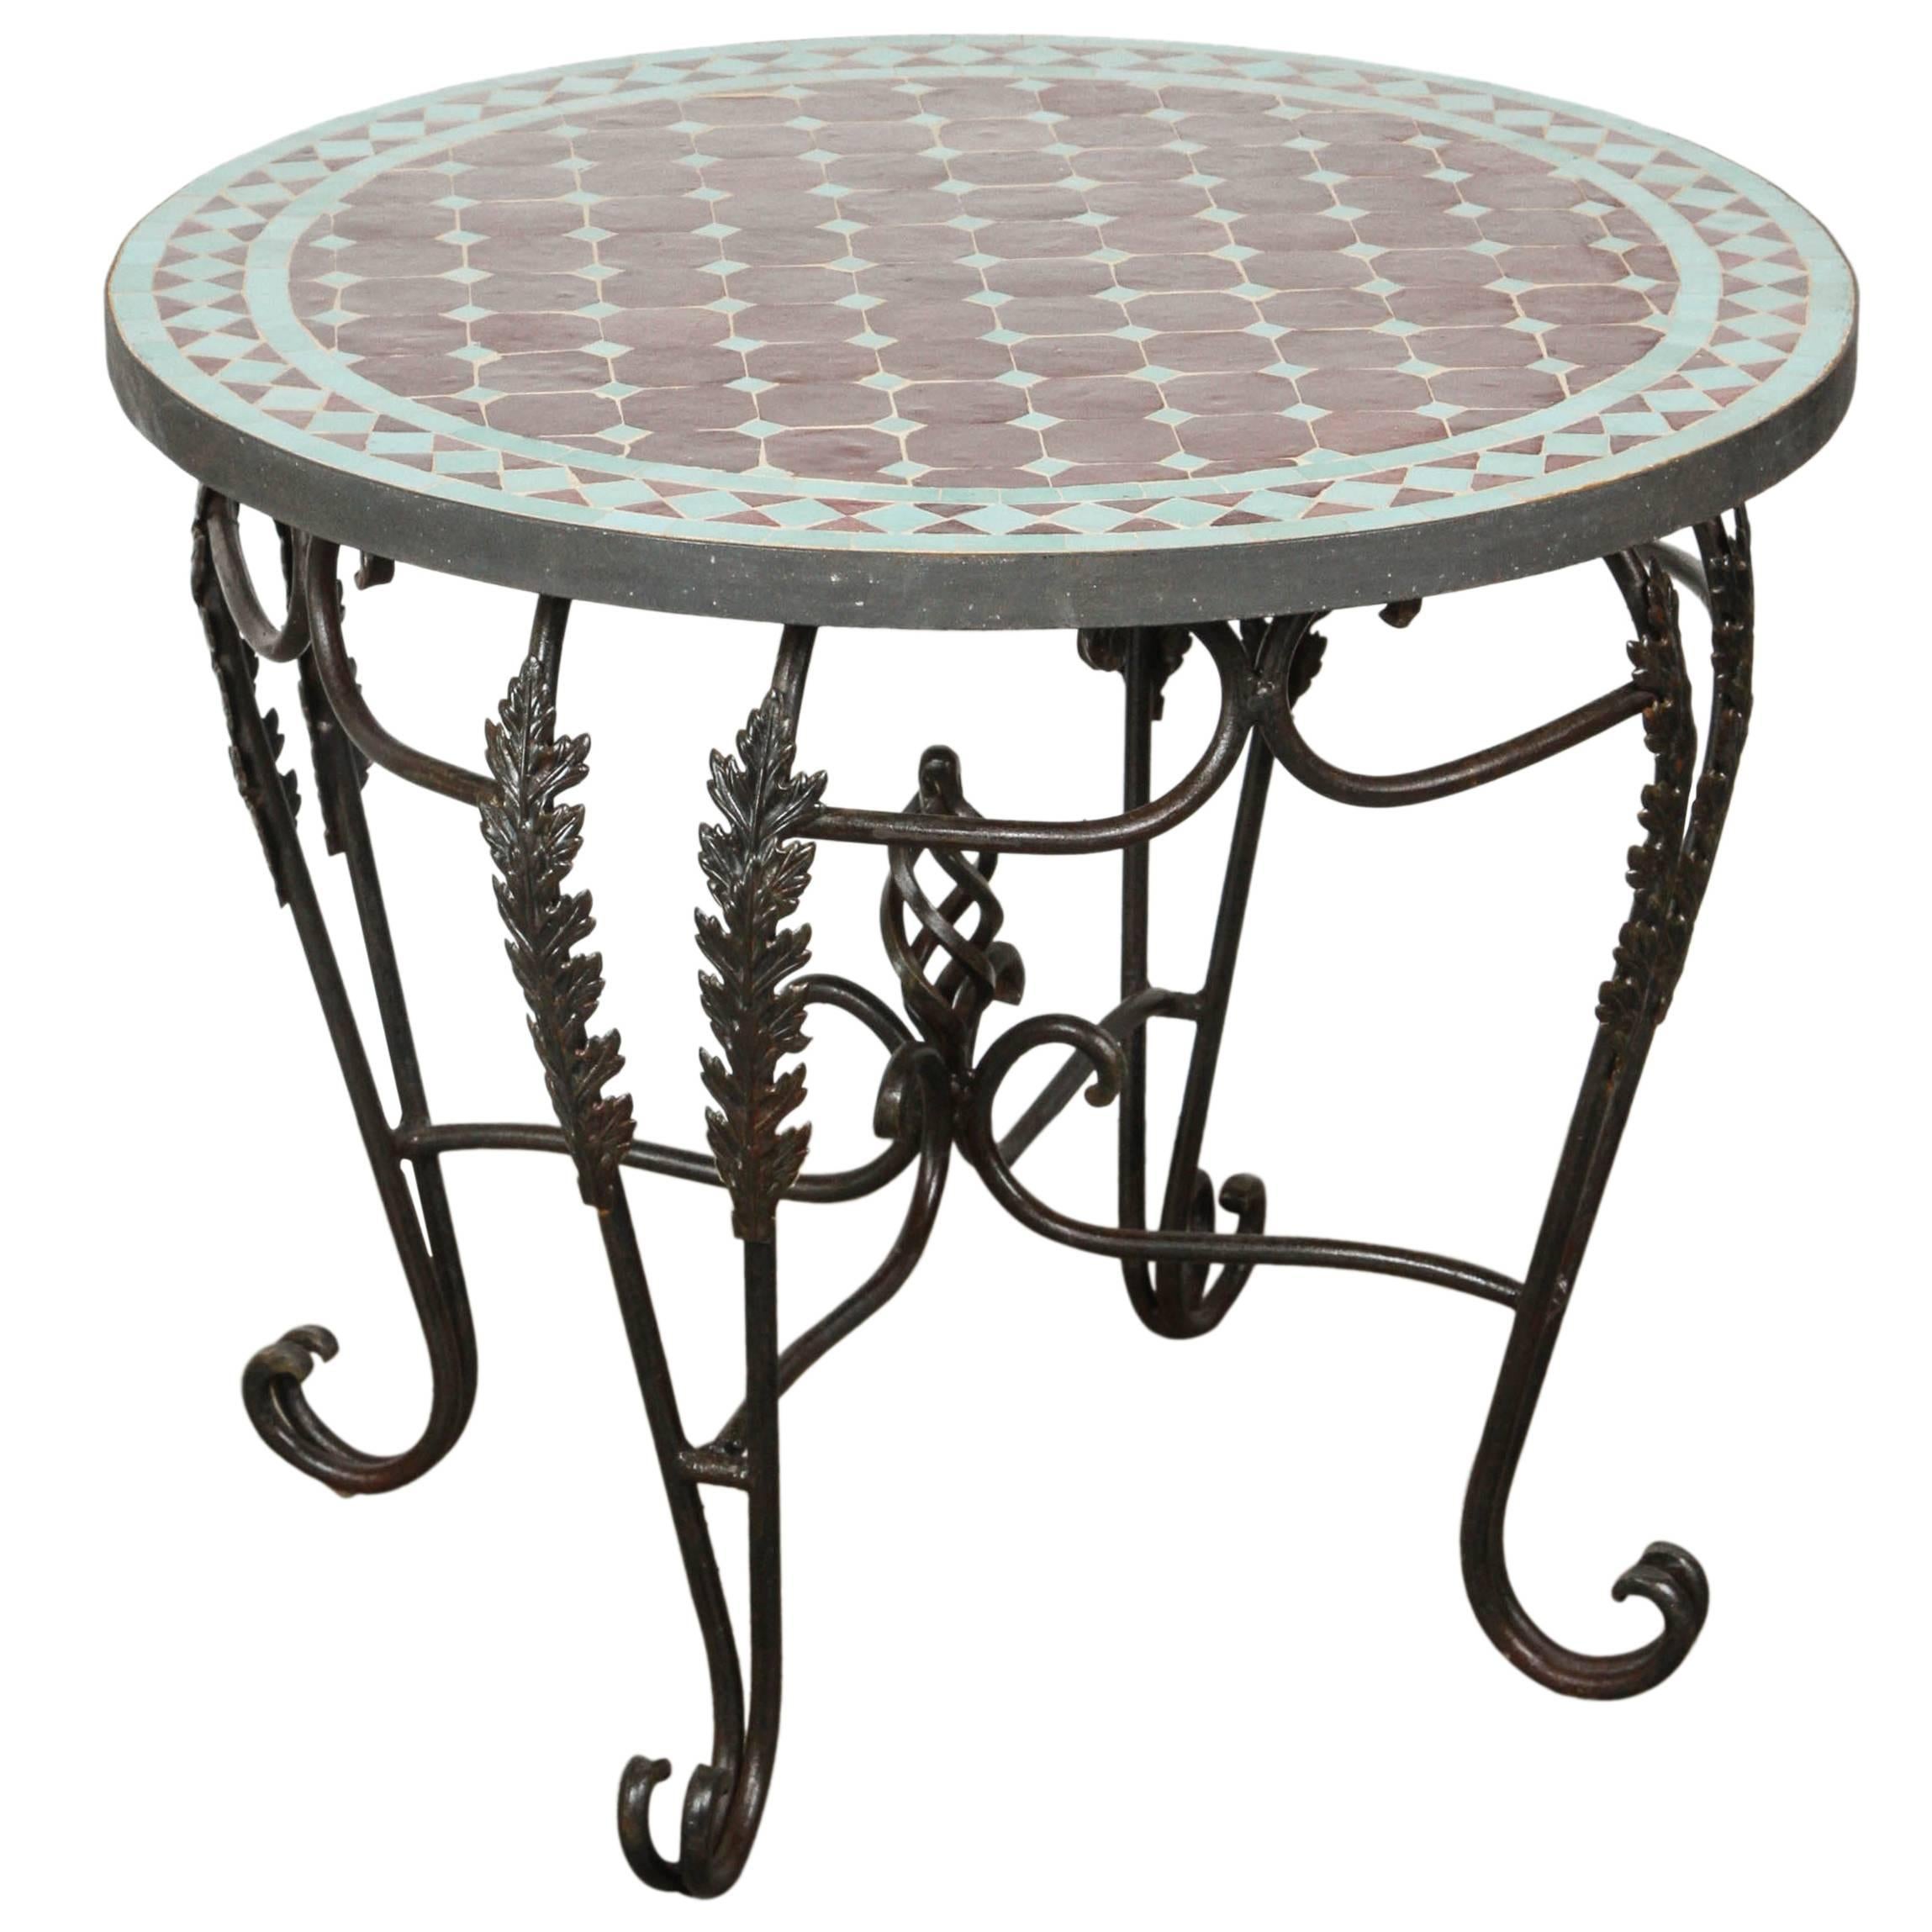 Moroccan Round Mosaic Tile Side Table Indoor or Outdoor